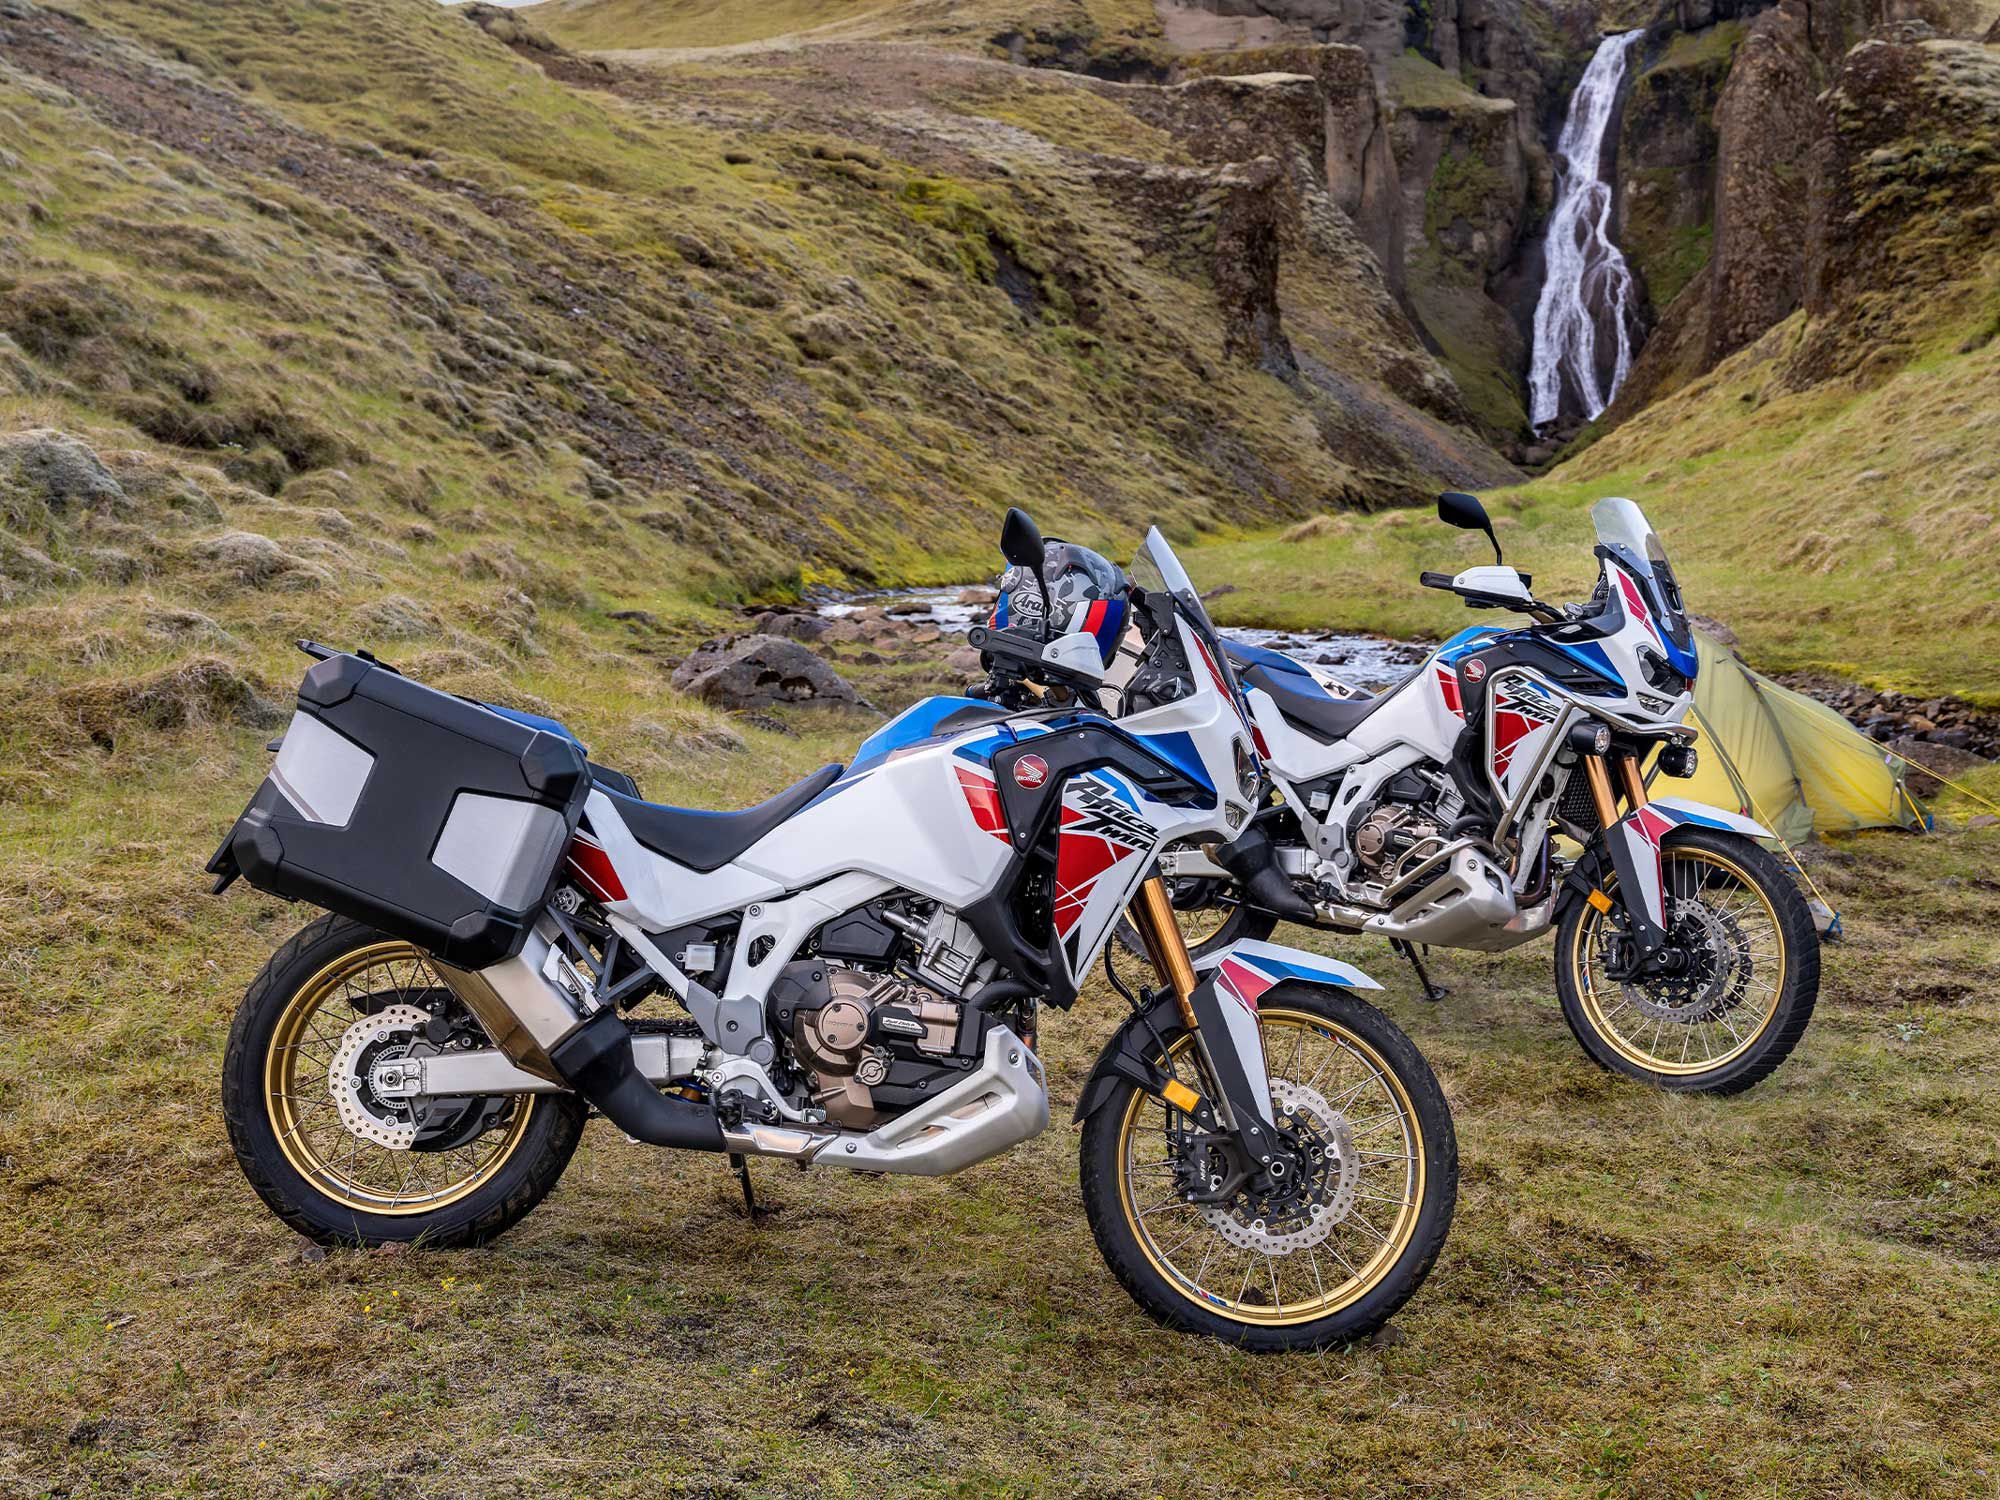 Honda’s Africa Twin took the ADV mpg crown by a whisker—a mud-soaked whisker, that is.